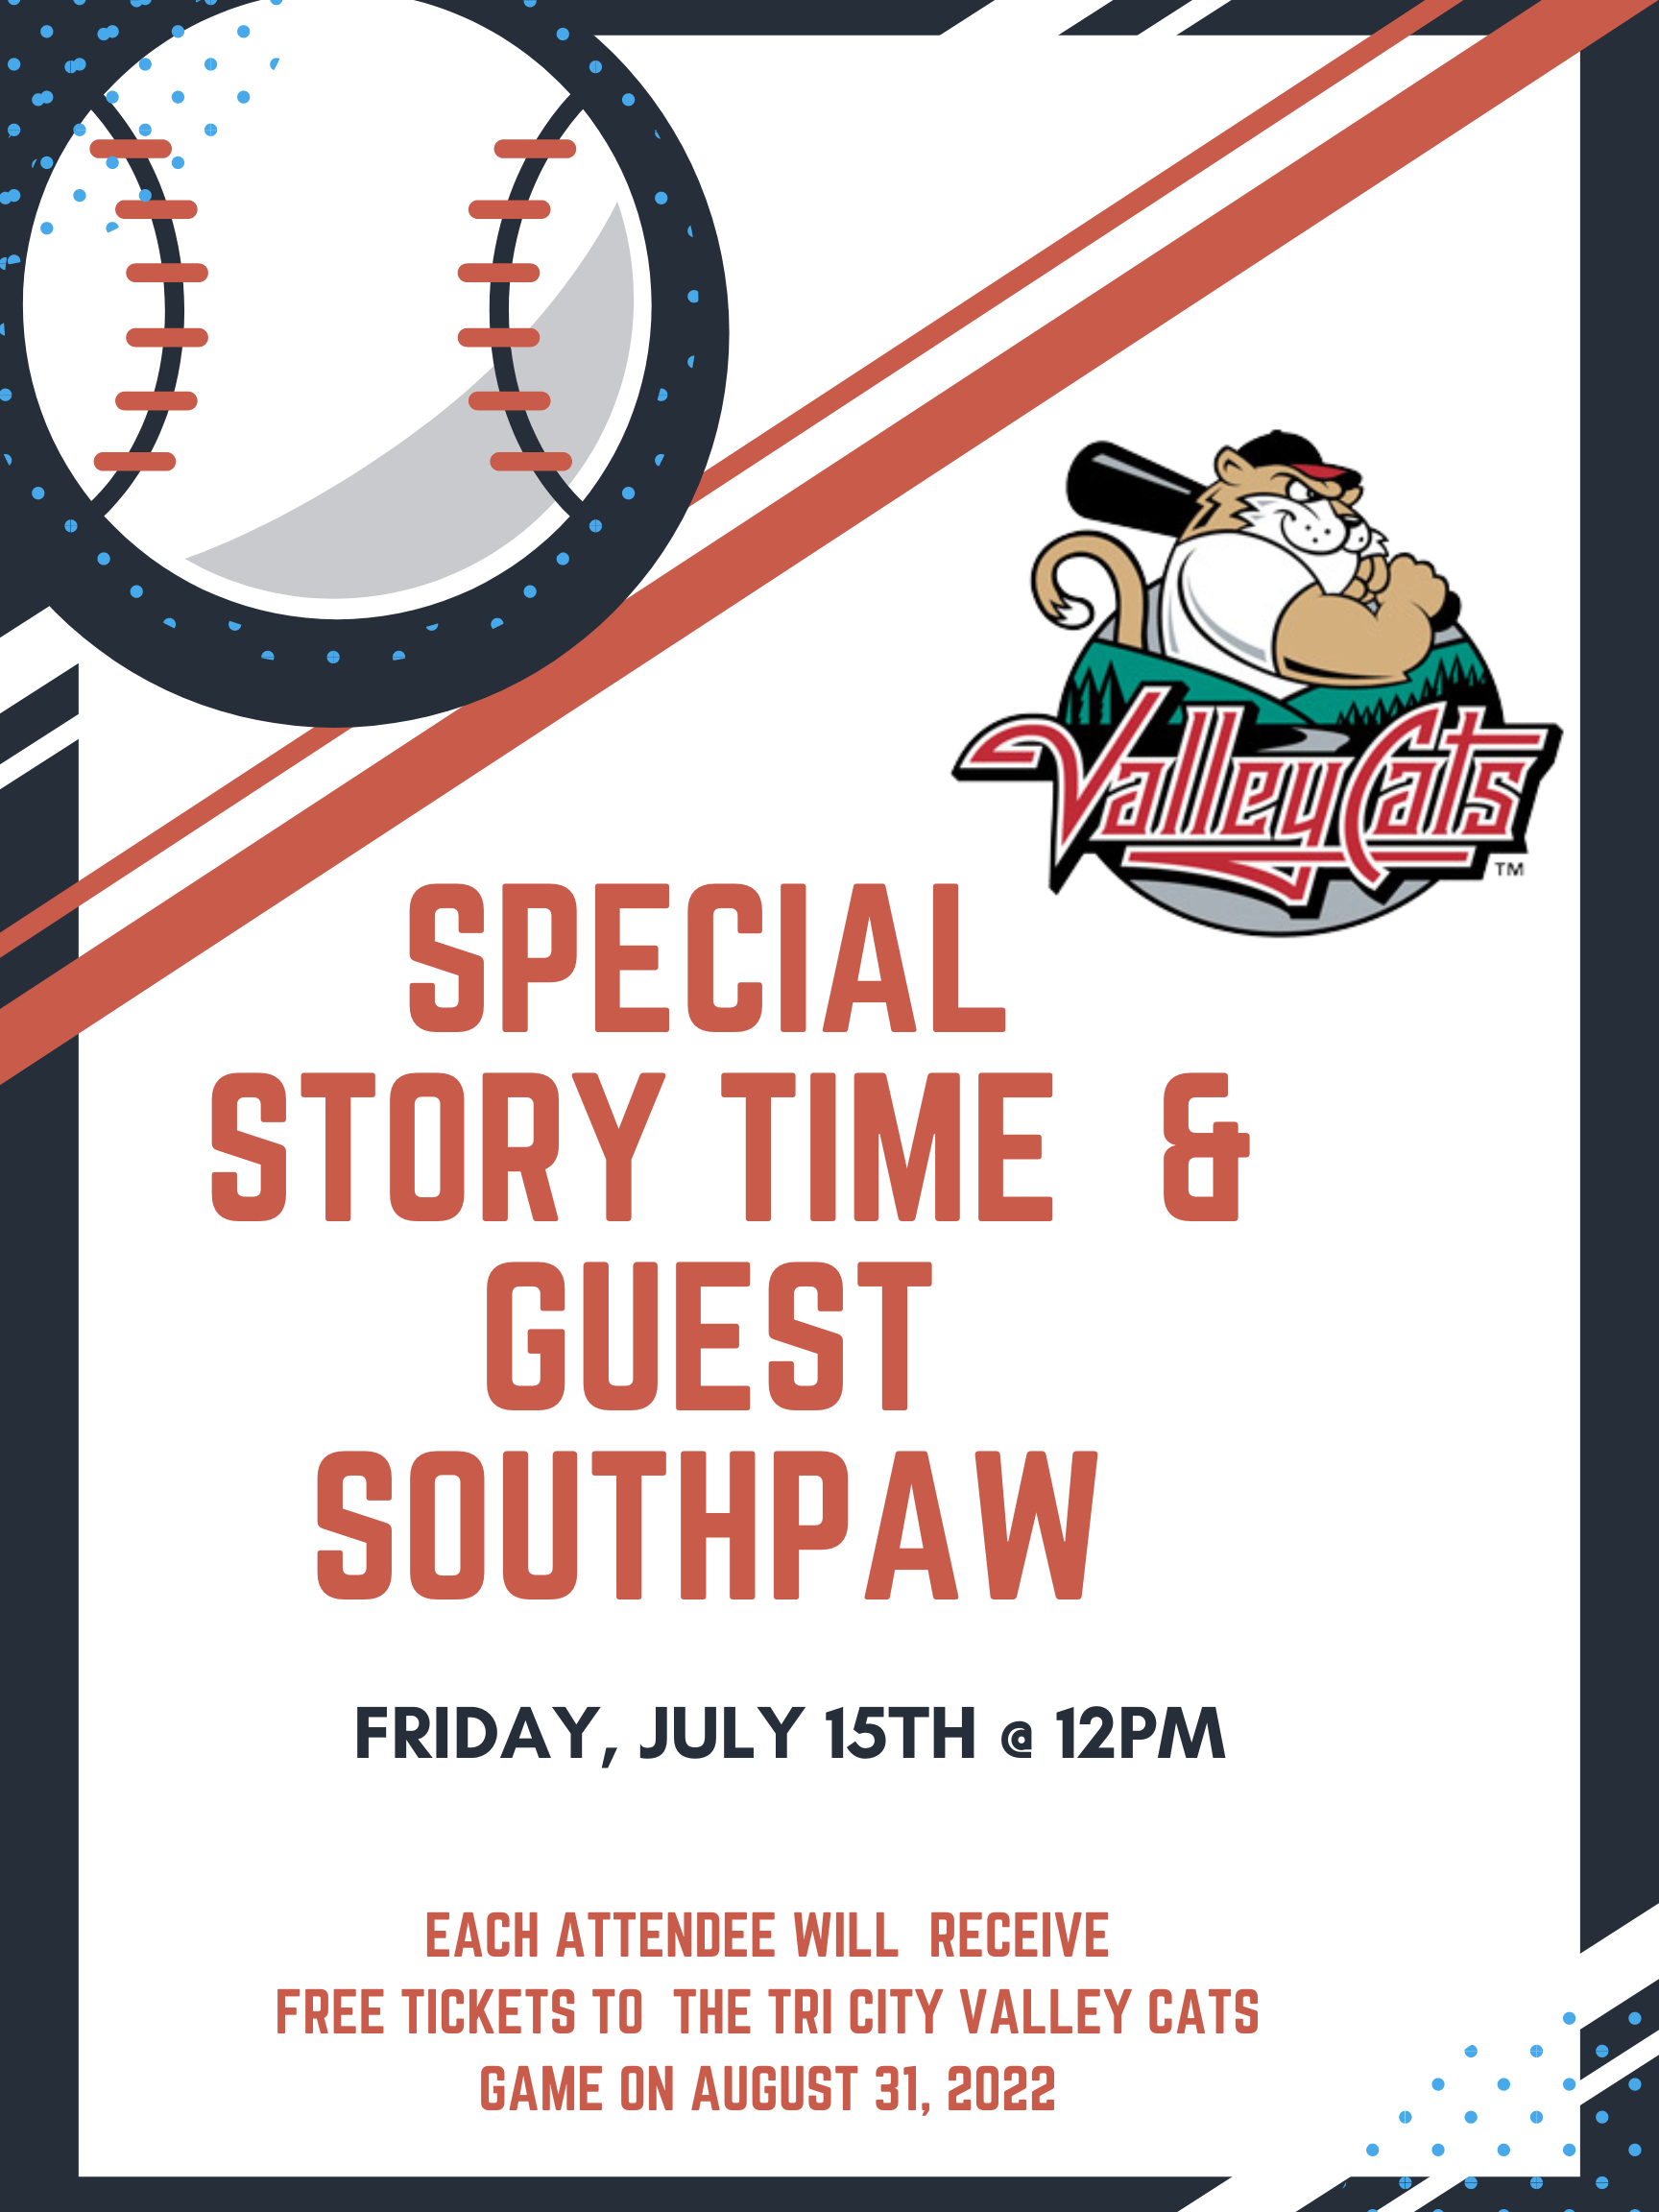 Special Story Time & Guest South Paw from the Tri City Valley Cats